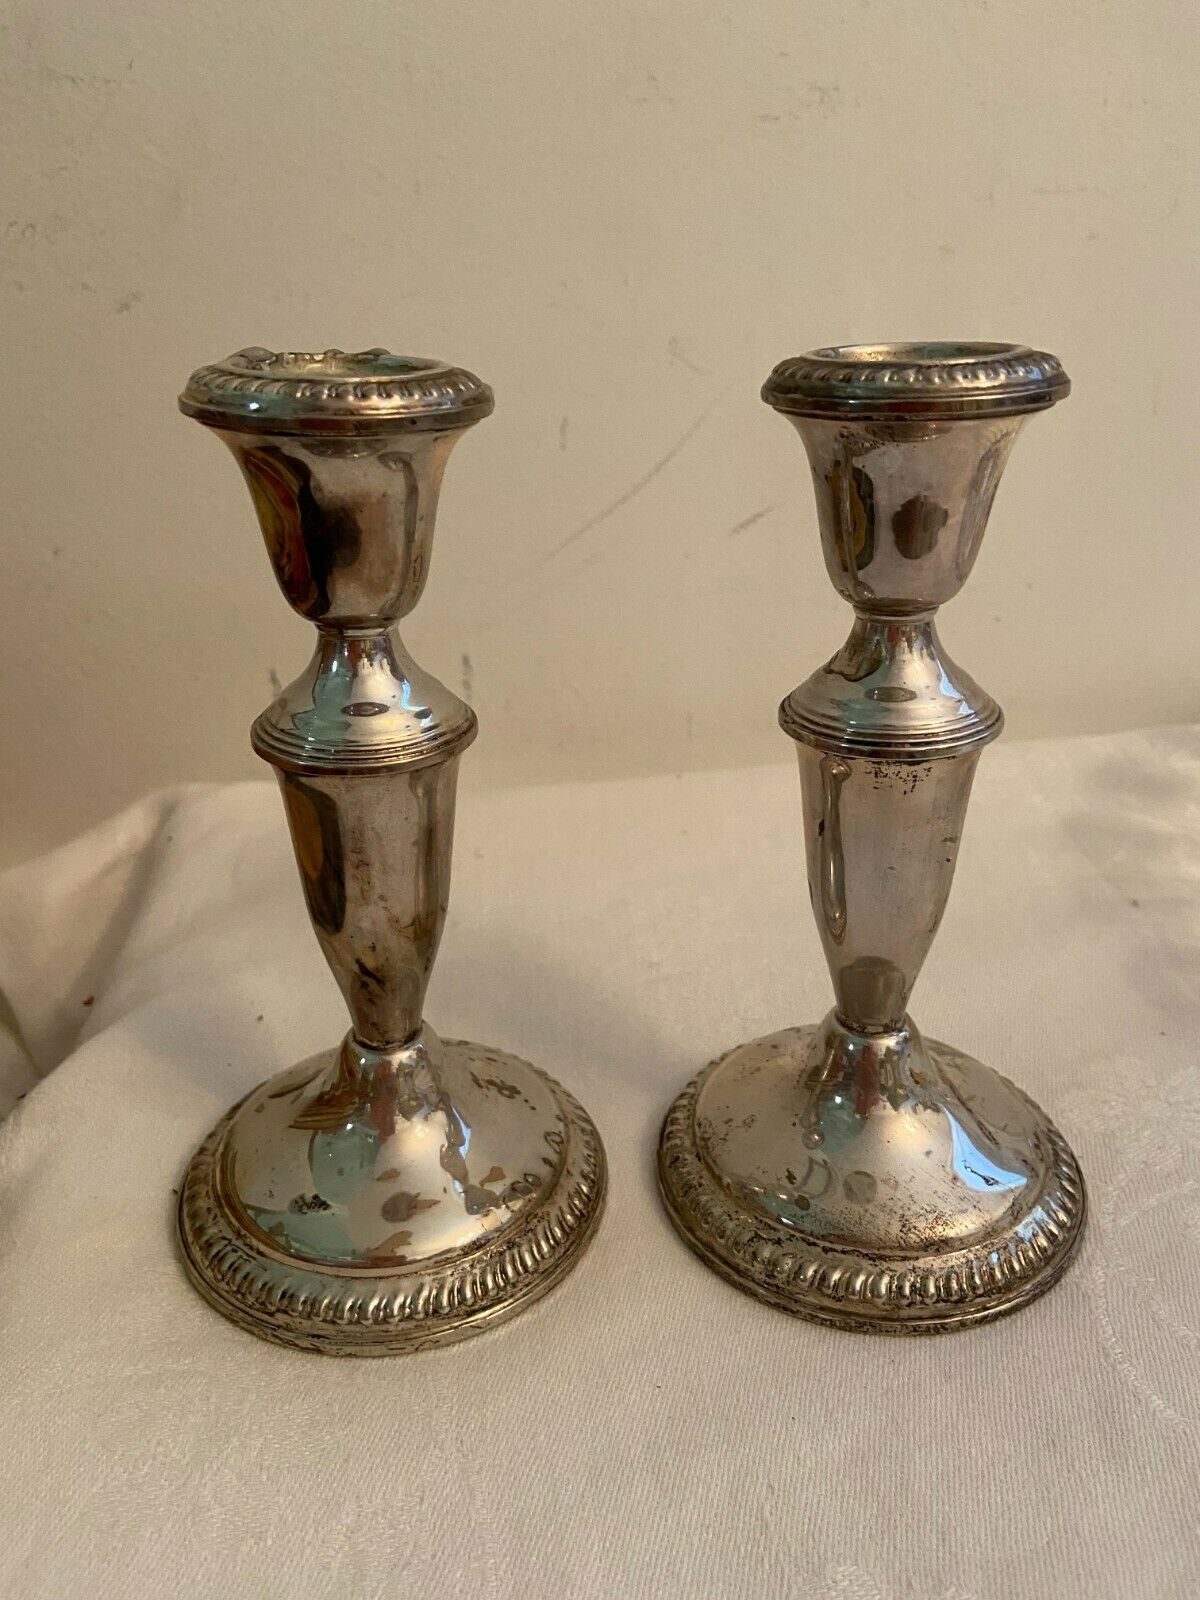 Vintage Empire Sterling Silver Weighted 6" Tall Pair Candlesticks 1 Lb 6 1/2 Oz